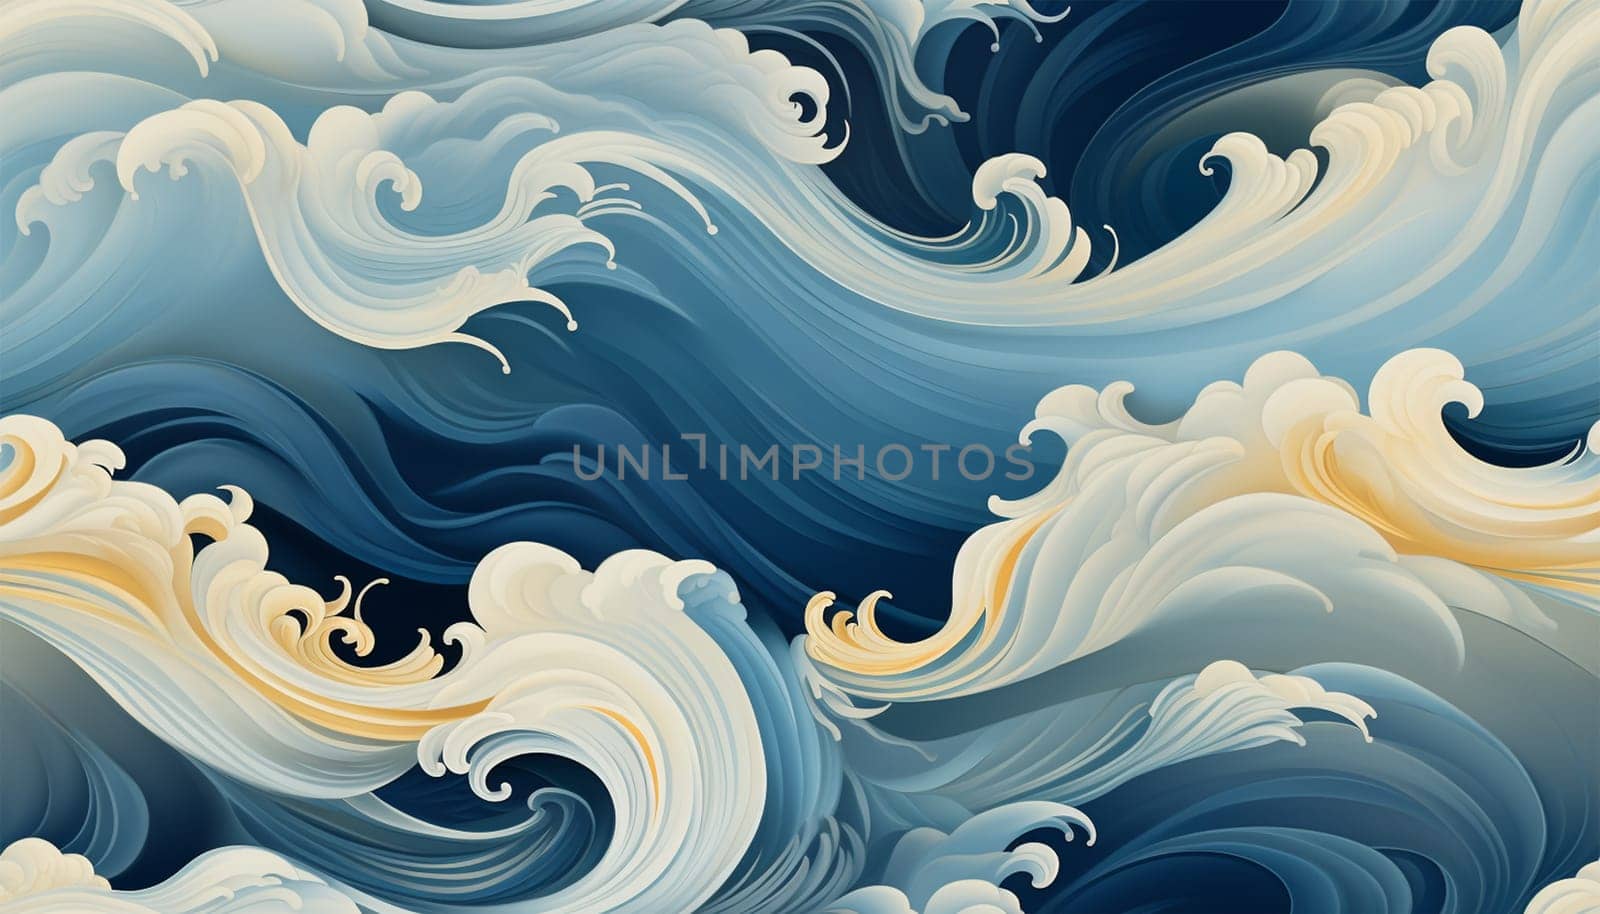 Sea waves pattern background. Waves pattern. Classic japanese waves in modern design,Blue and white lines. Element for design. Storm ocean. posters and prints by Annebel146